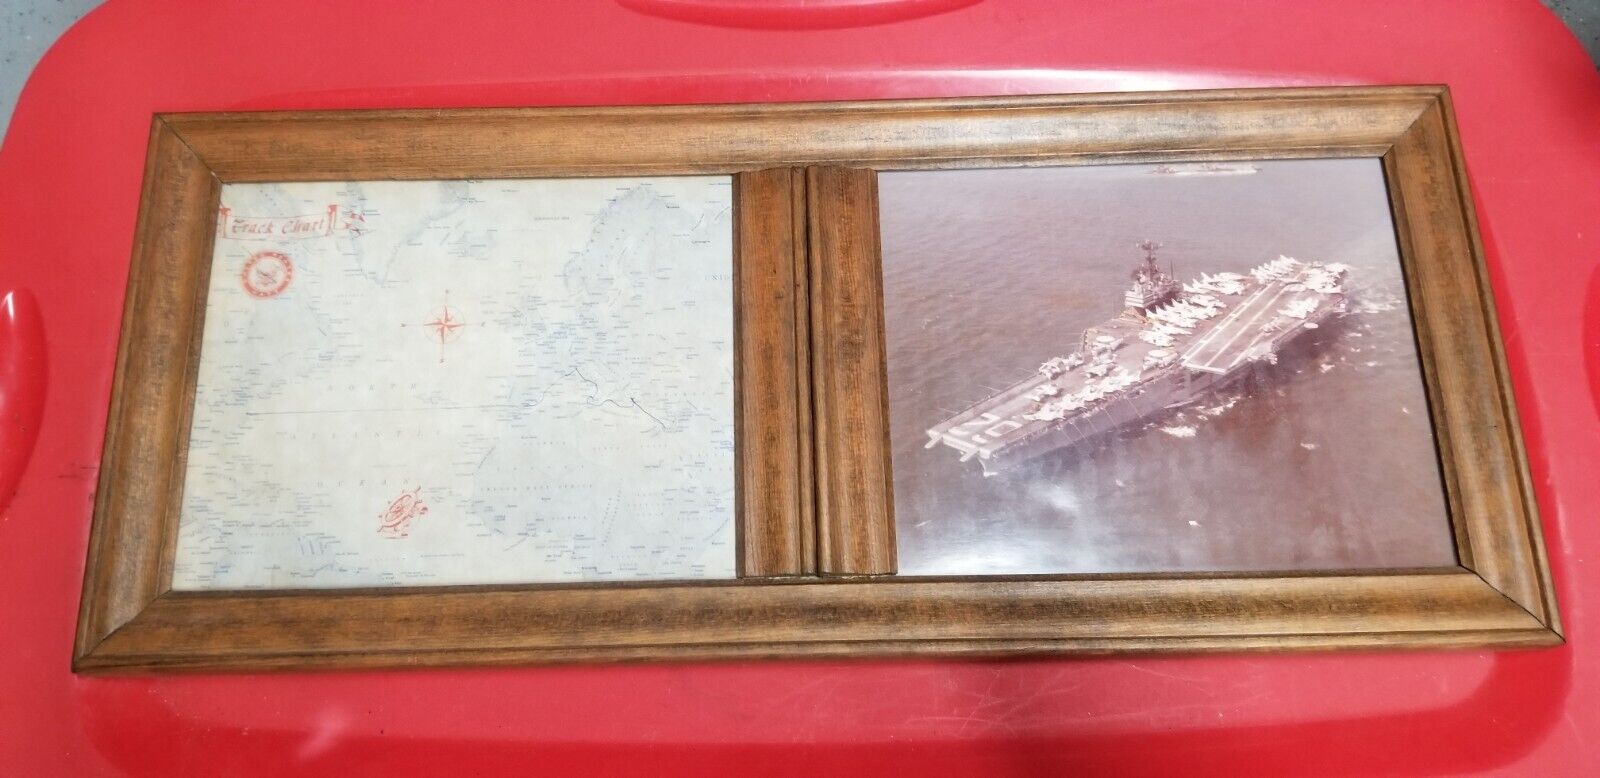 USS INDEPENDENCE (CV-62) 24 X 10 Framed Pics W/Med Cruise Chart-1970-FREE SHIP